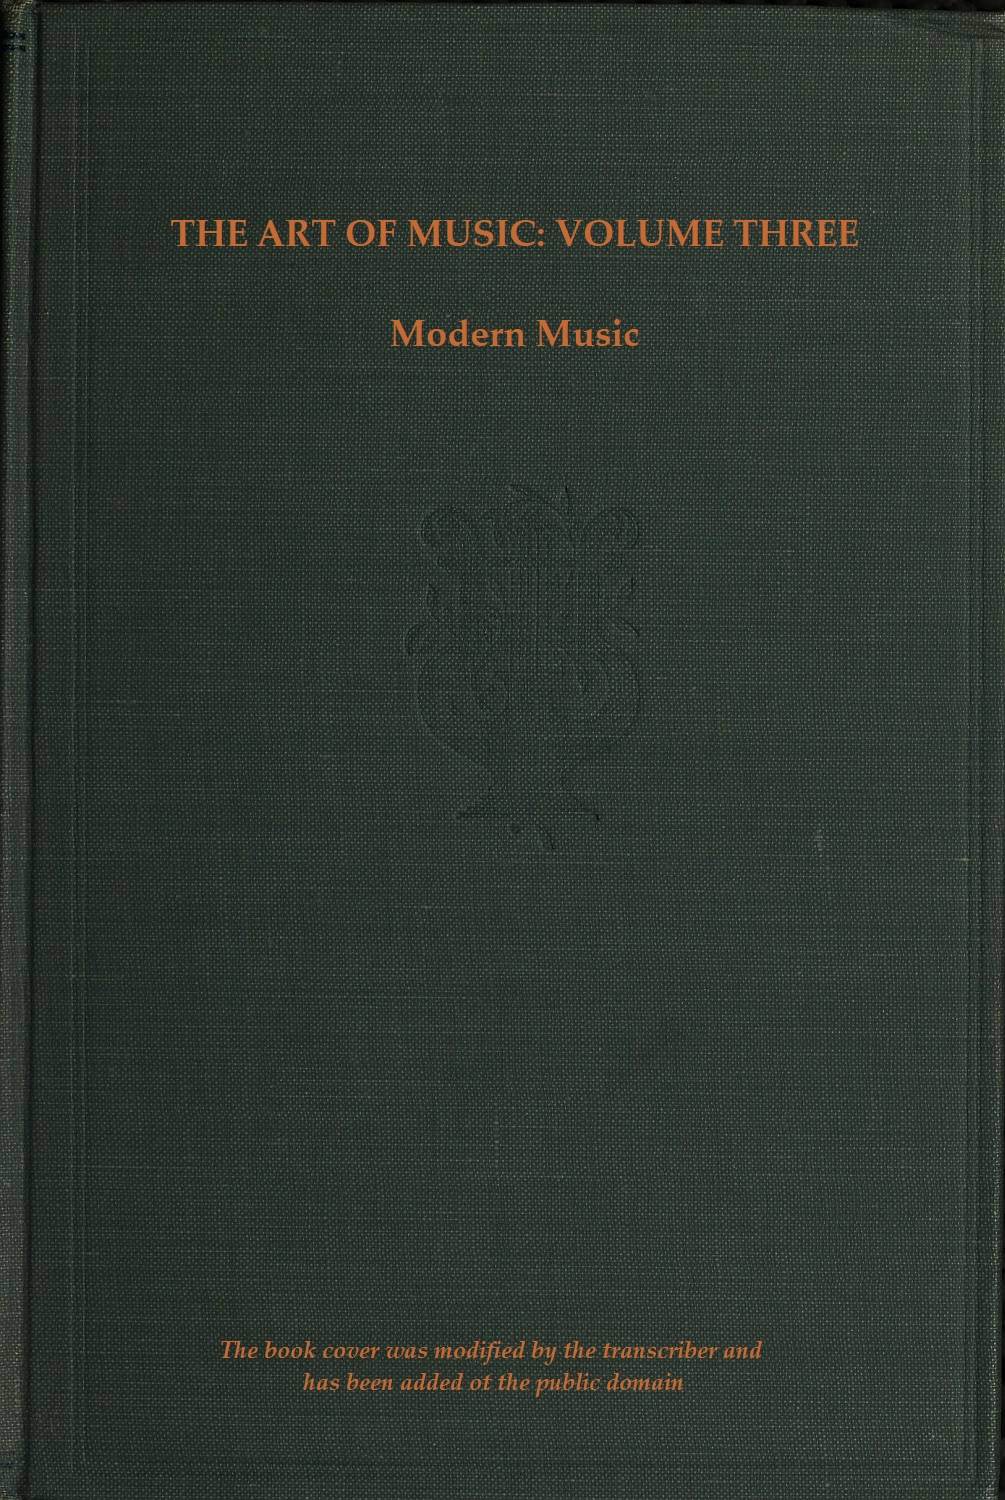 The art of music, Vol. 03 (of 14), A narrative history of music. Book 3, modern music&#10;A Comprehensive Library of Information for Music Lovers and Musicians